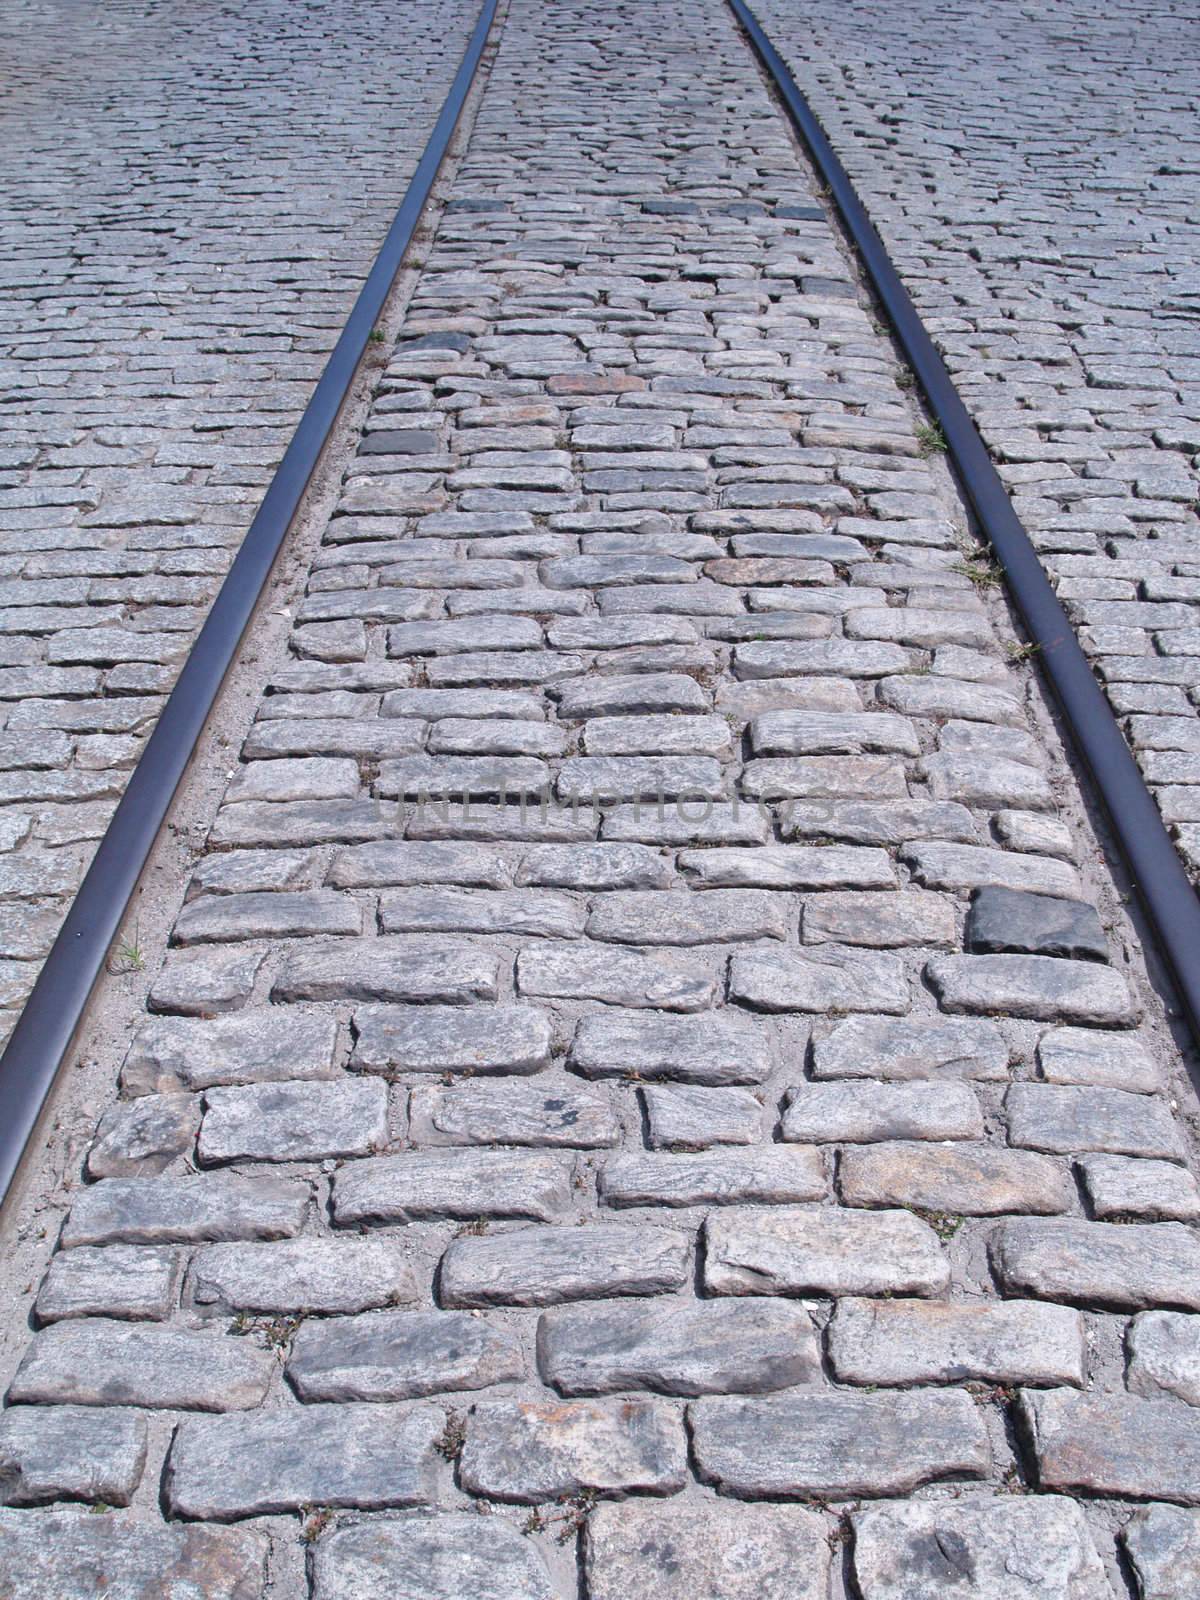 Train tracks embedded in down the middle of an old cobblestone road.